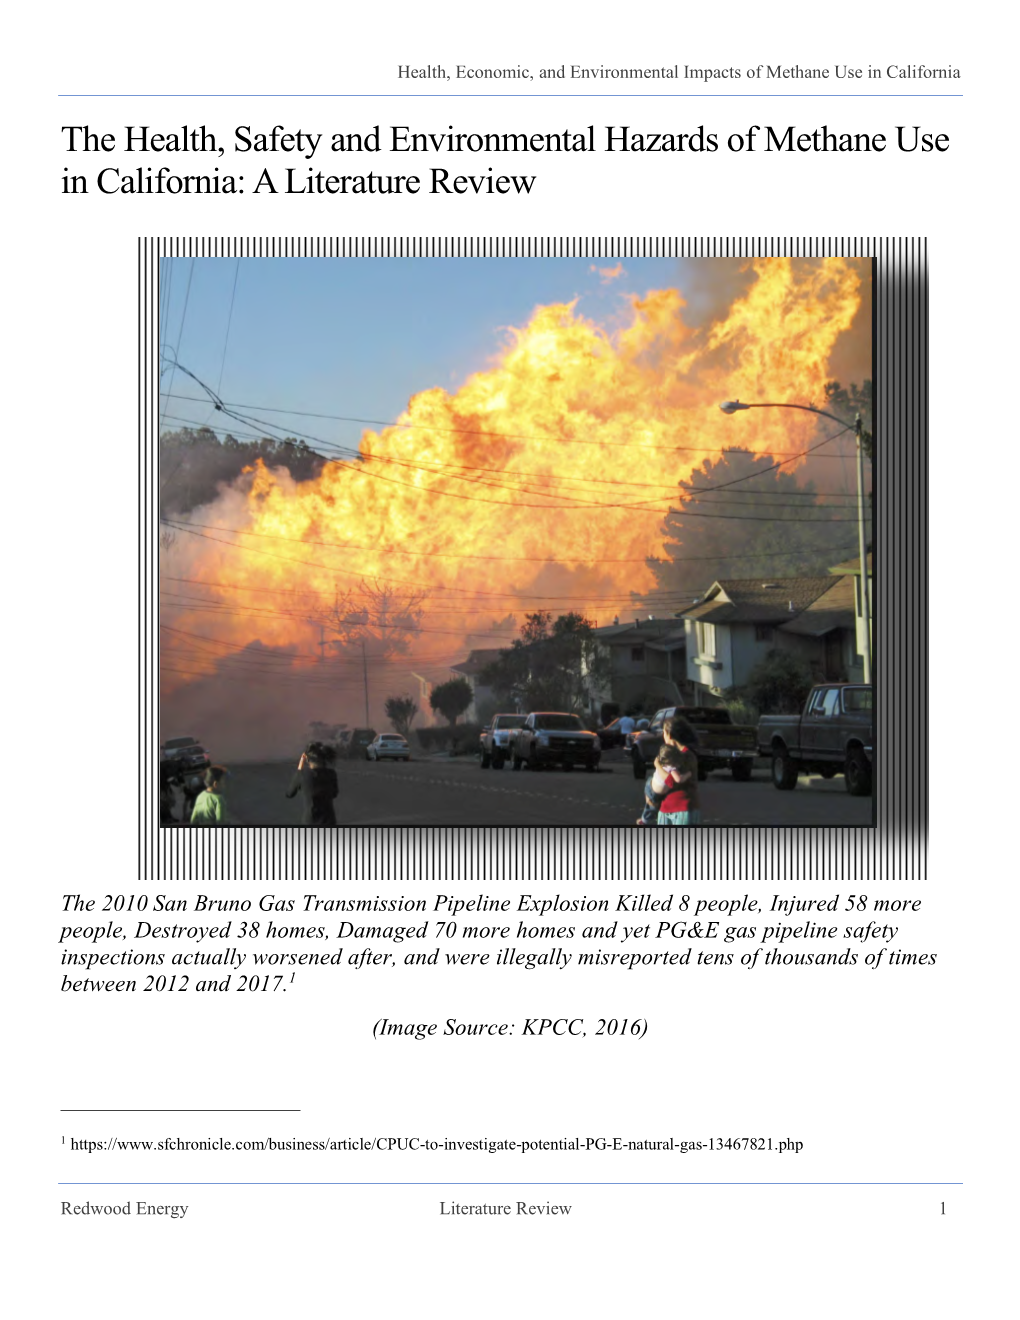 The Health, Safety and Environmental Hazards of Methane Use in California: a Literature Review